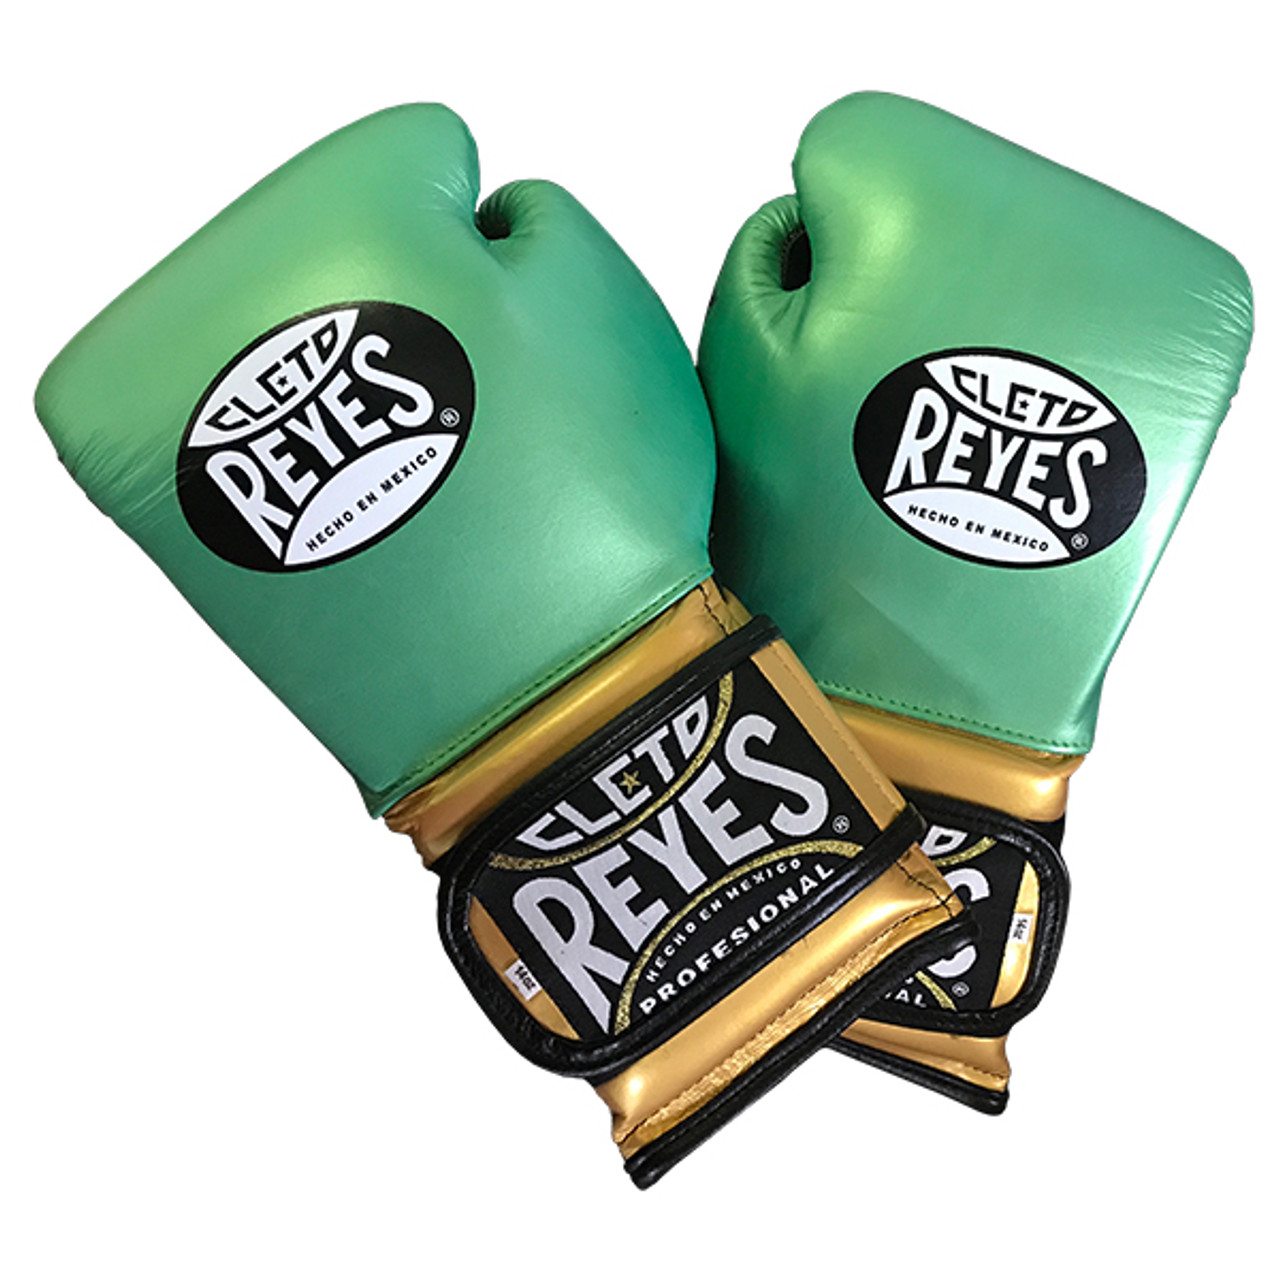 https://cdn11.bigcommerce.com/s-wlnvw17/images/stencil/1280x1280/products/799/1675/Cleto-Reyes-Boxing-Gloves-With-Hook-and-Loop-Clousure-WBC-Edition__08818.1656543049.jpg?c=2